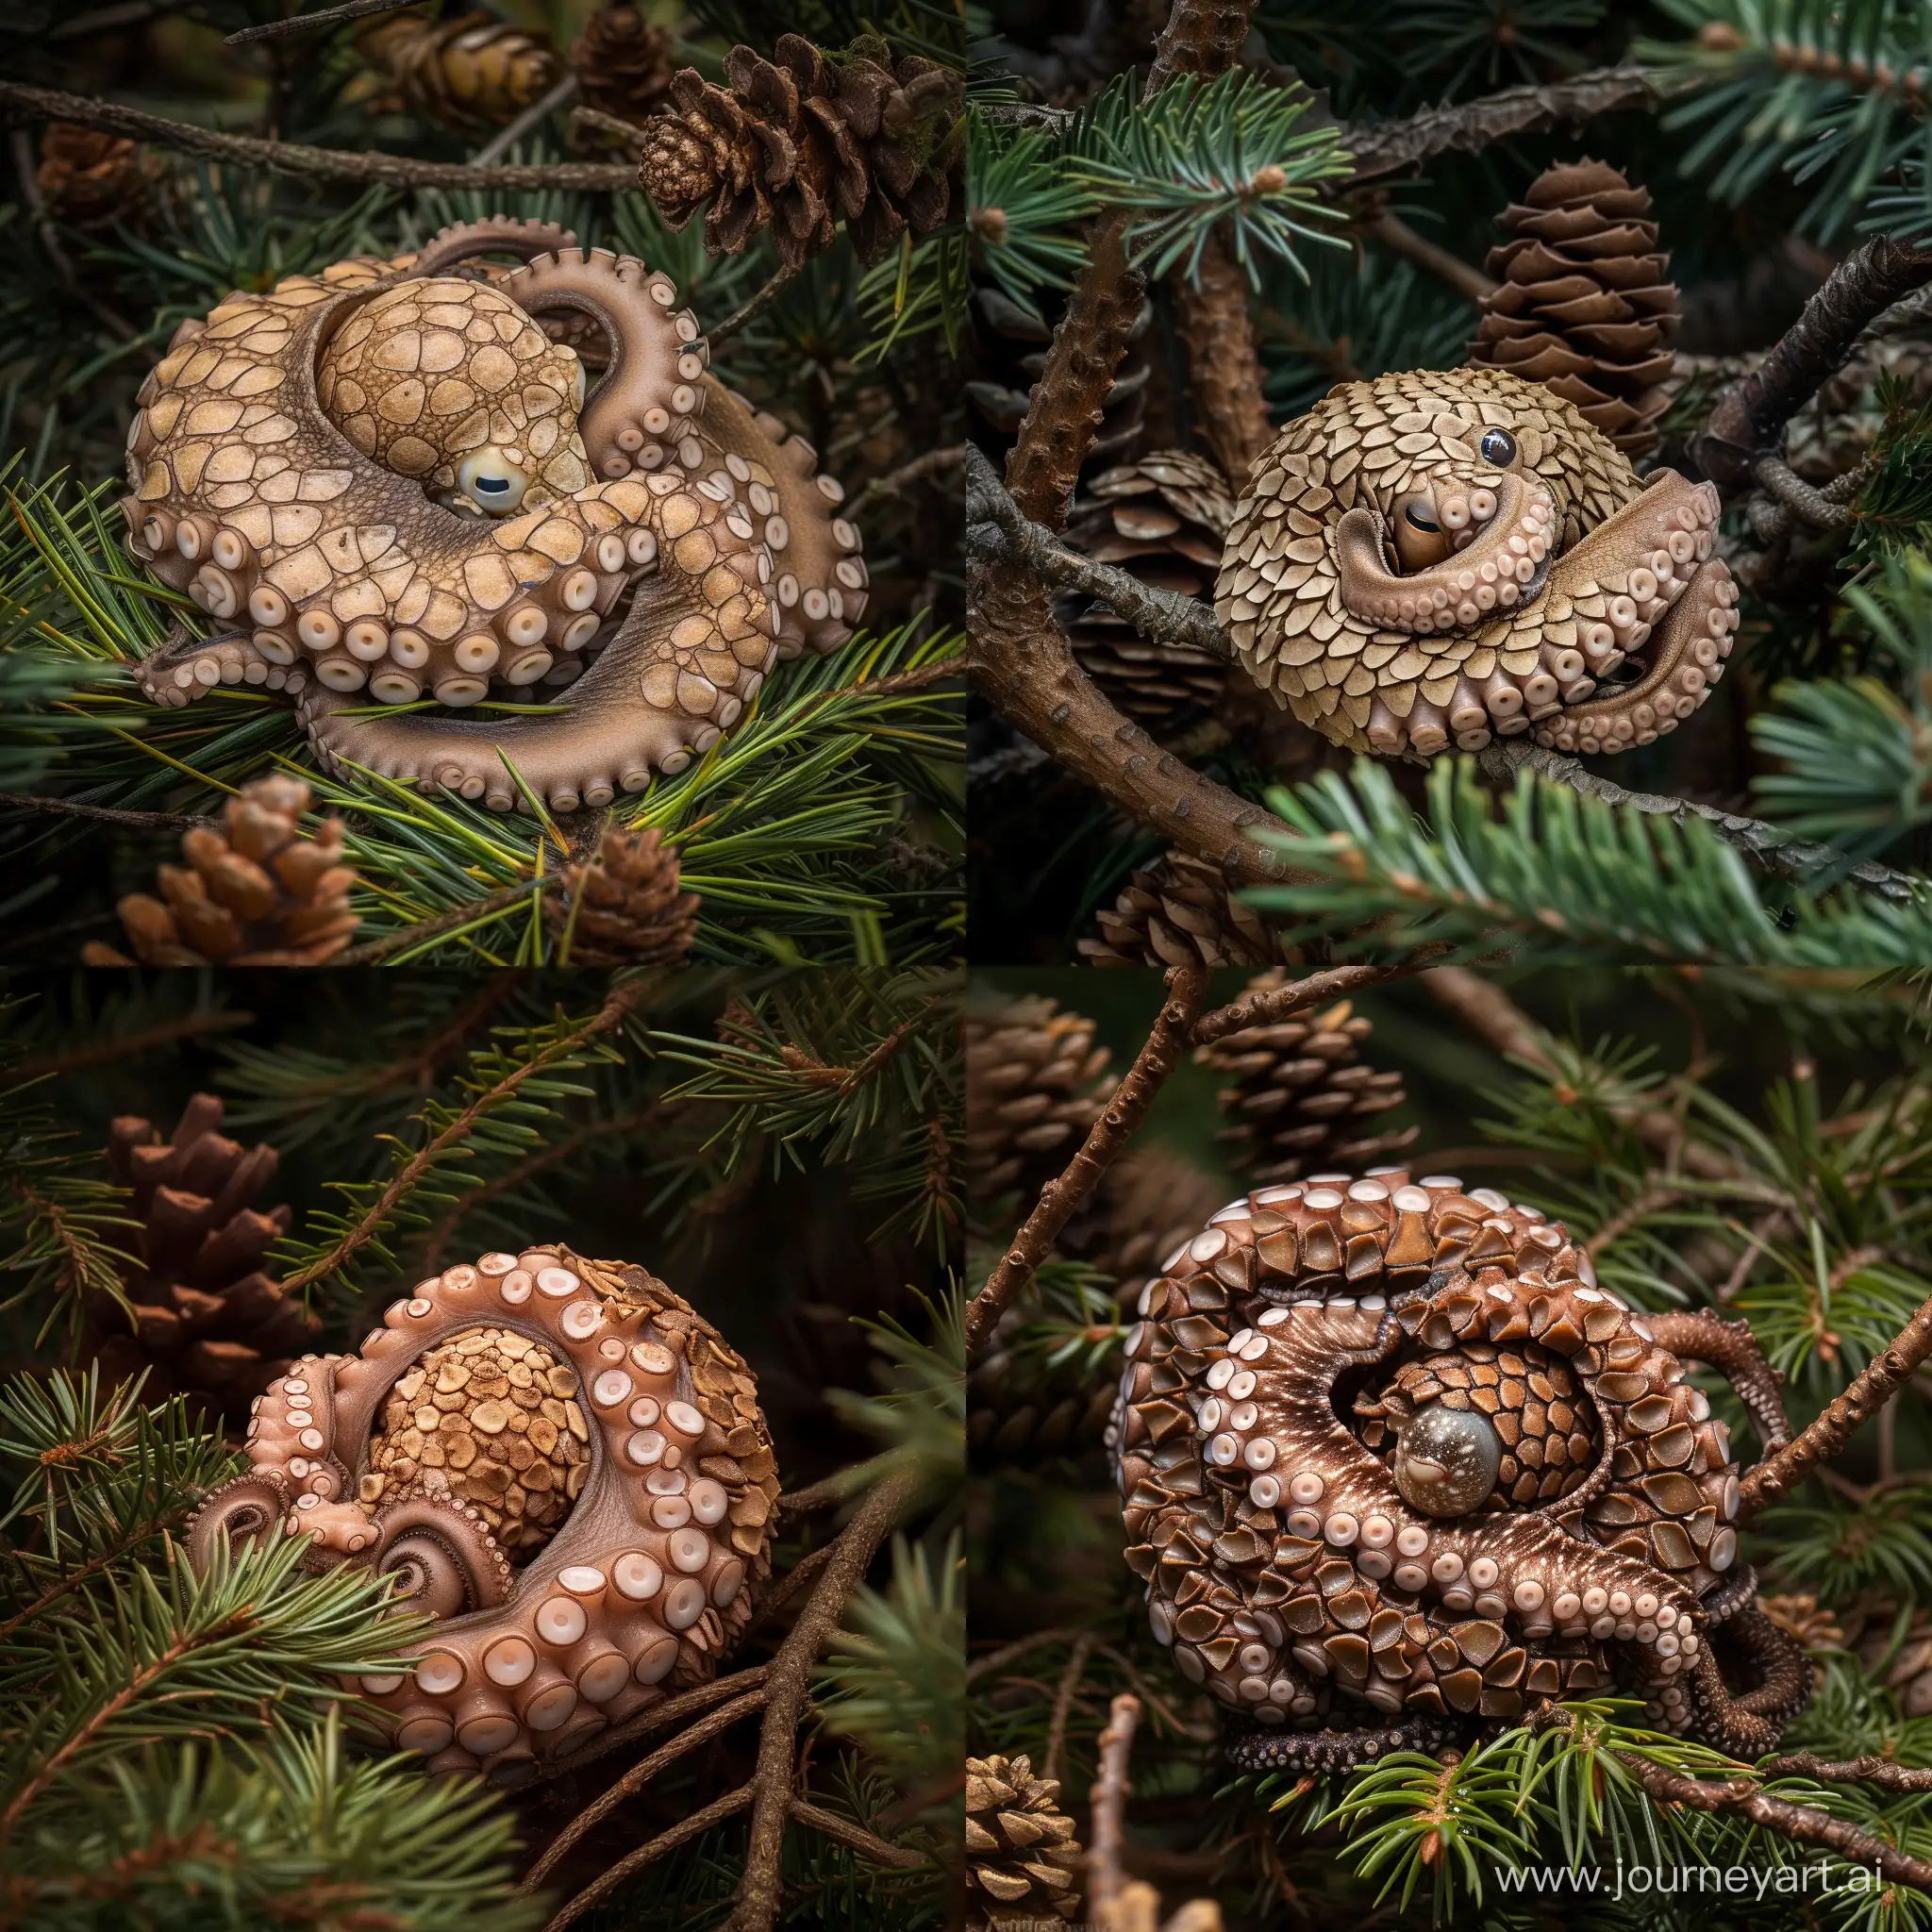 detailed crisp sharp award winning wildlife photo of a rare small pale brown octopus covered in overlapping plated pinecone scales, it is in the shape of a pinecone, curled up hiding in a pine tree, it looks exactly like a pinecone, only the eyes are visible, dense foliage with pinecones, temperate pine rainforest, bright daylight, telephoto lens, canon camera, wide shot with branches and context, good composition, Frans Lanting